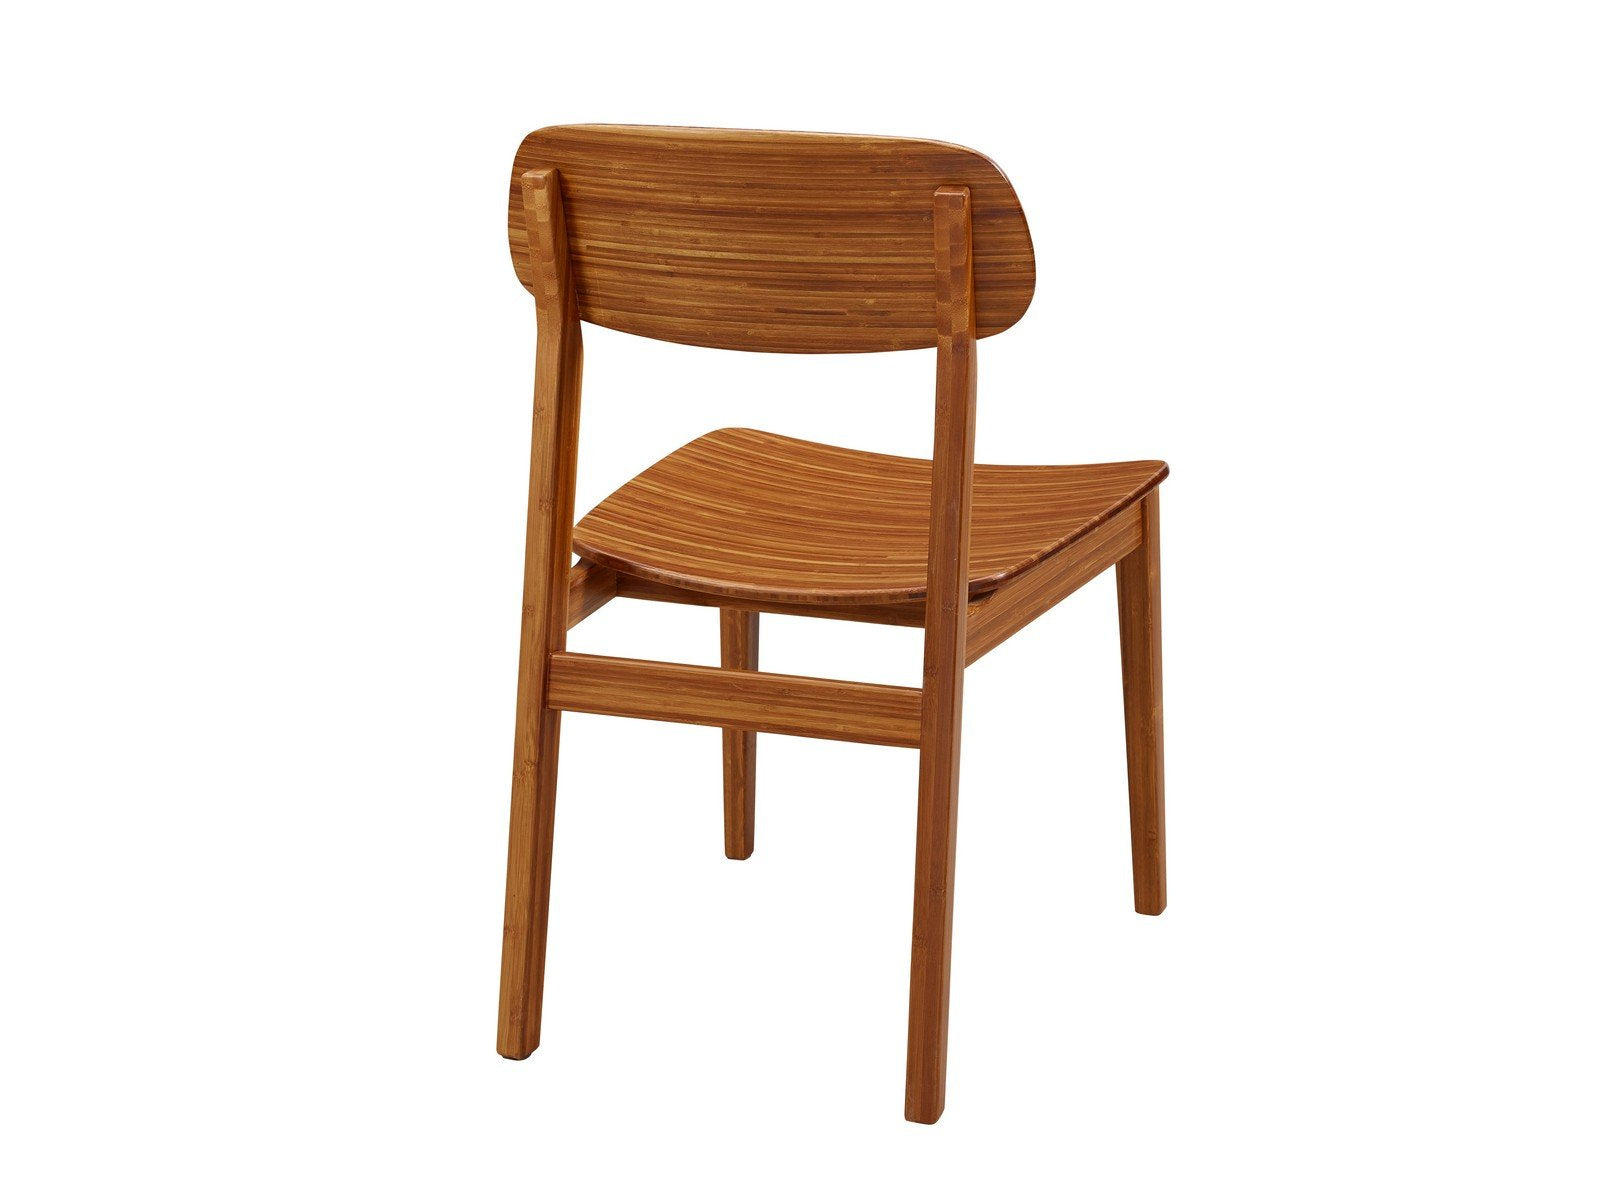 Greenington Currant Chair - Boxed set of 2, Amber - G0023AM - 2